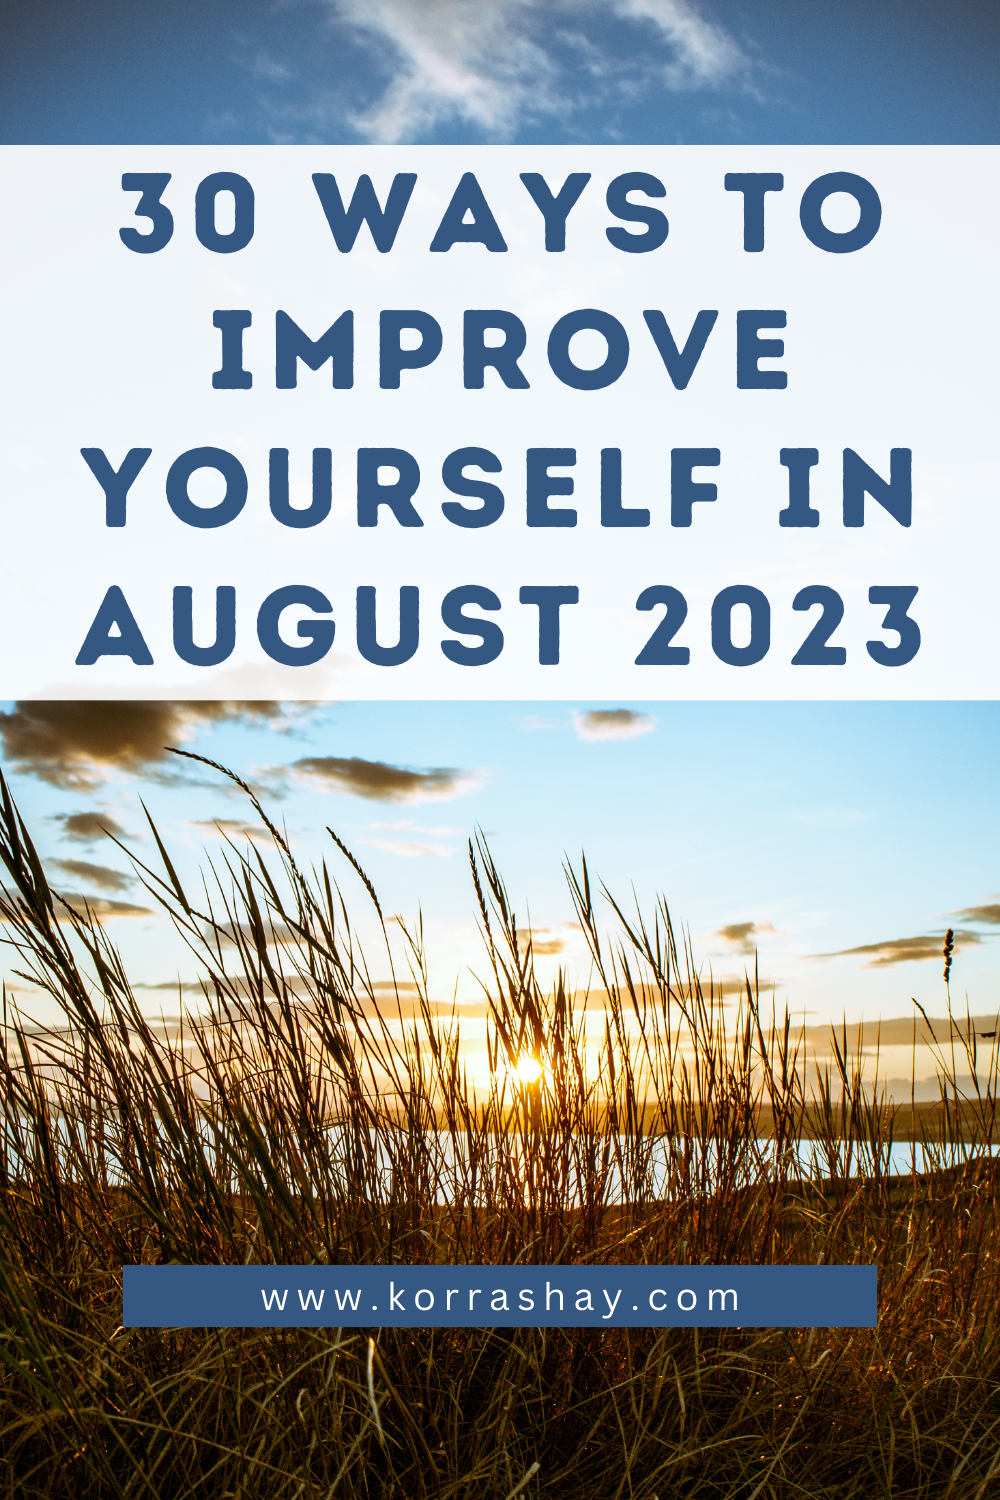 30 Ways To Improve Yourself In August 2023